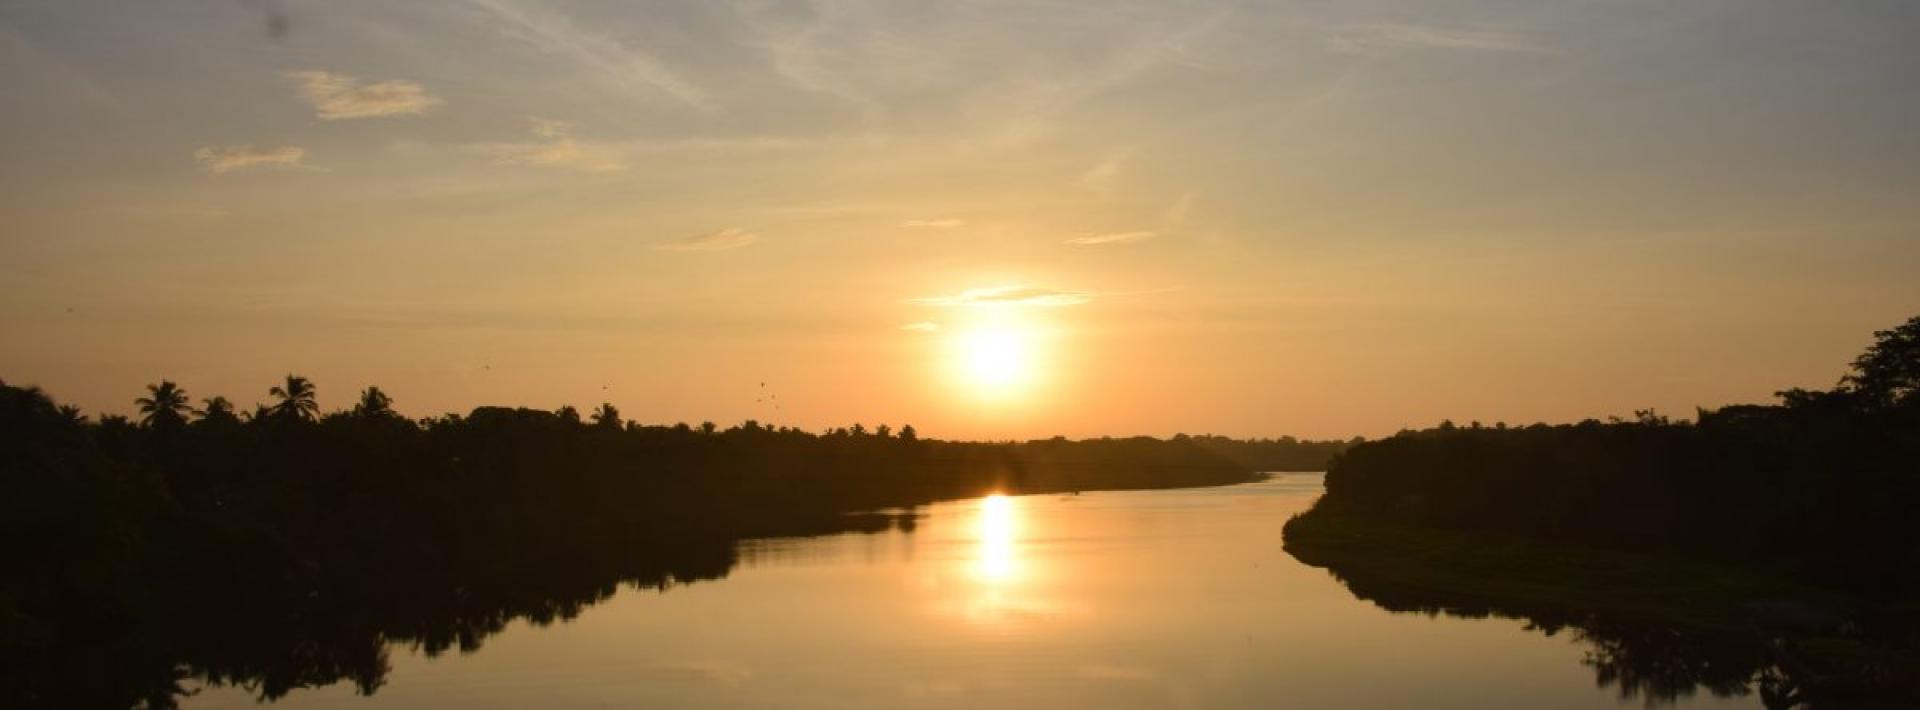 sunset over a wide river